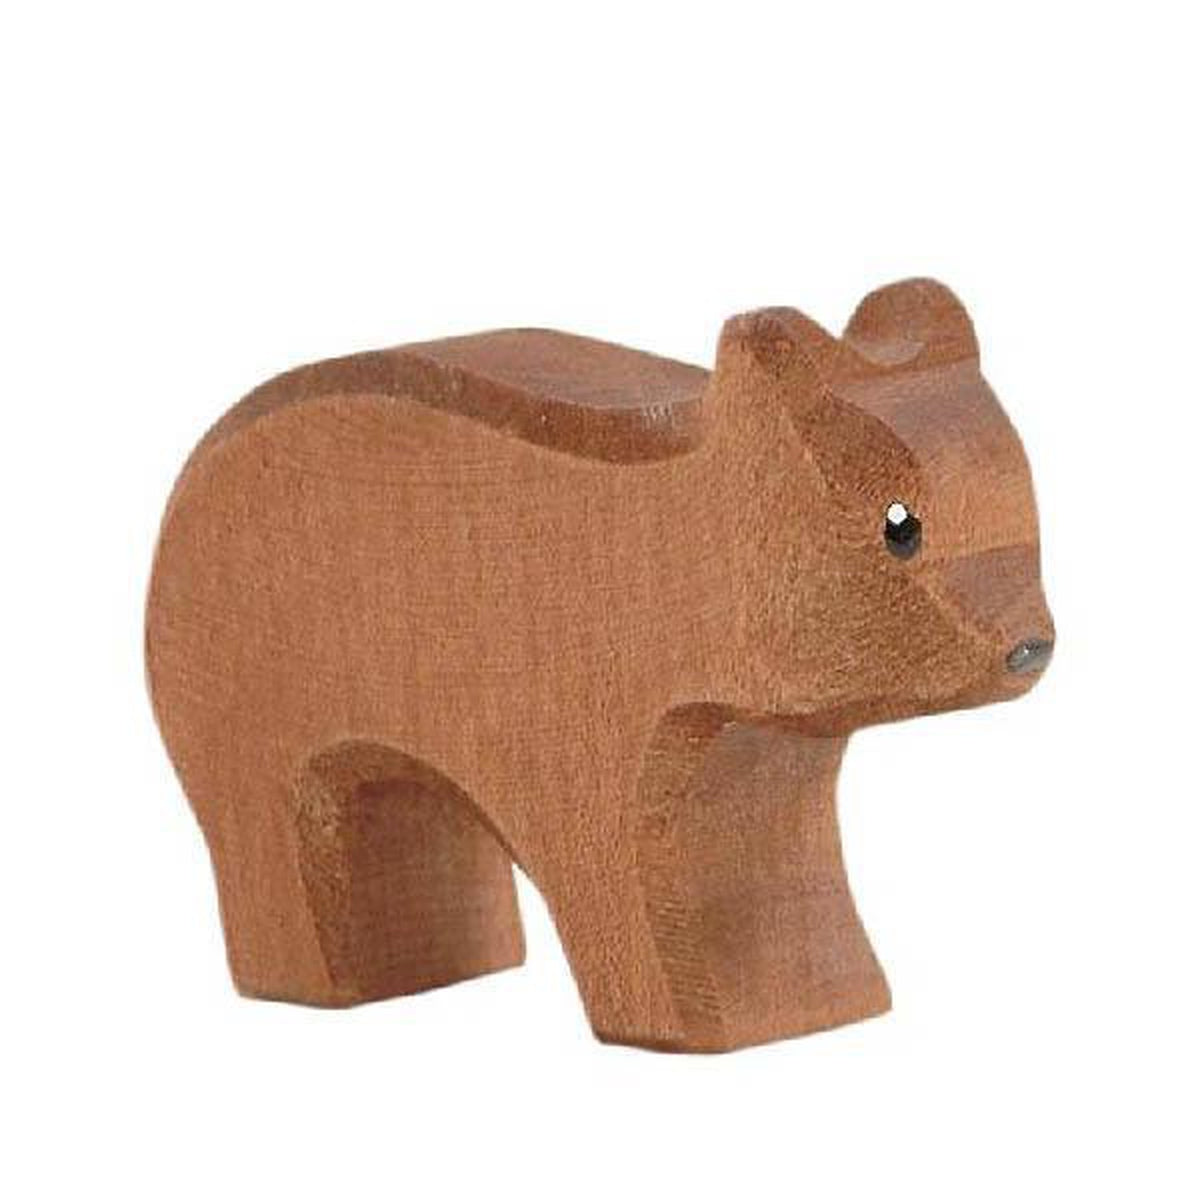 Ostheimer wooden bear cub, running-people, animals & lands-Fire the Imagination-Dilly Dally Kids